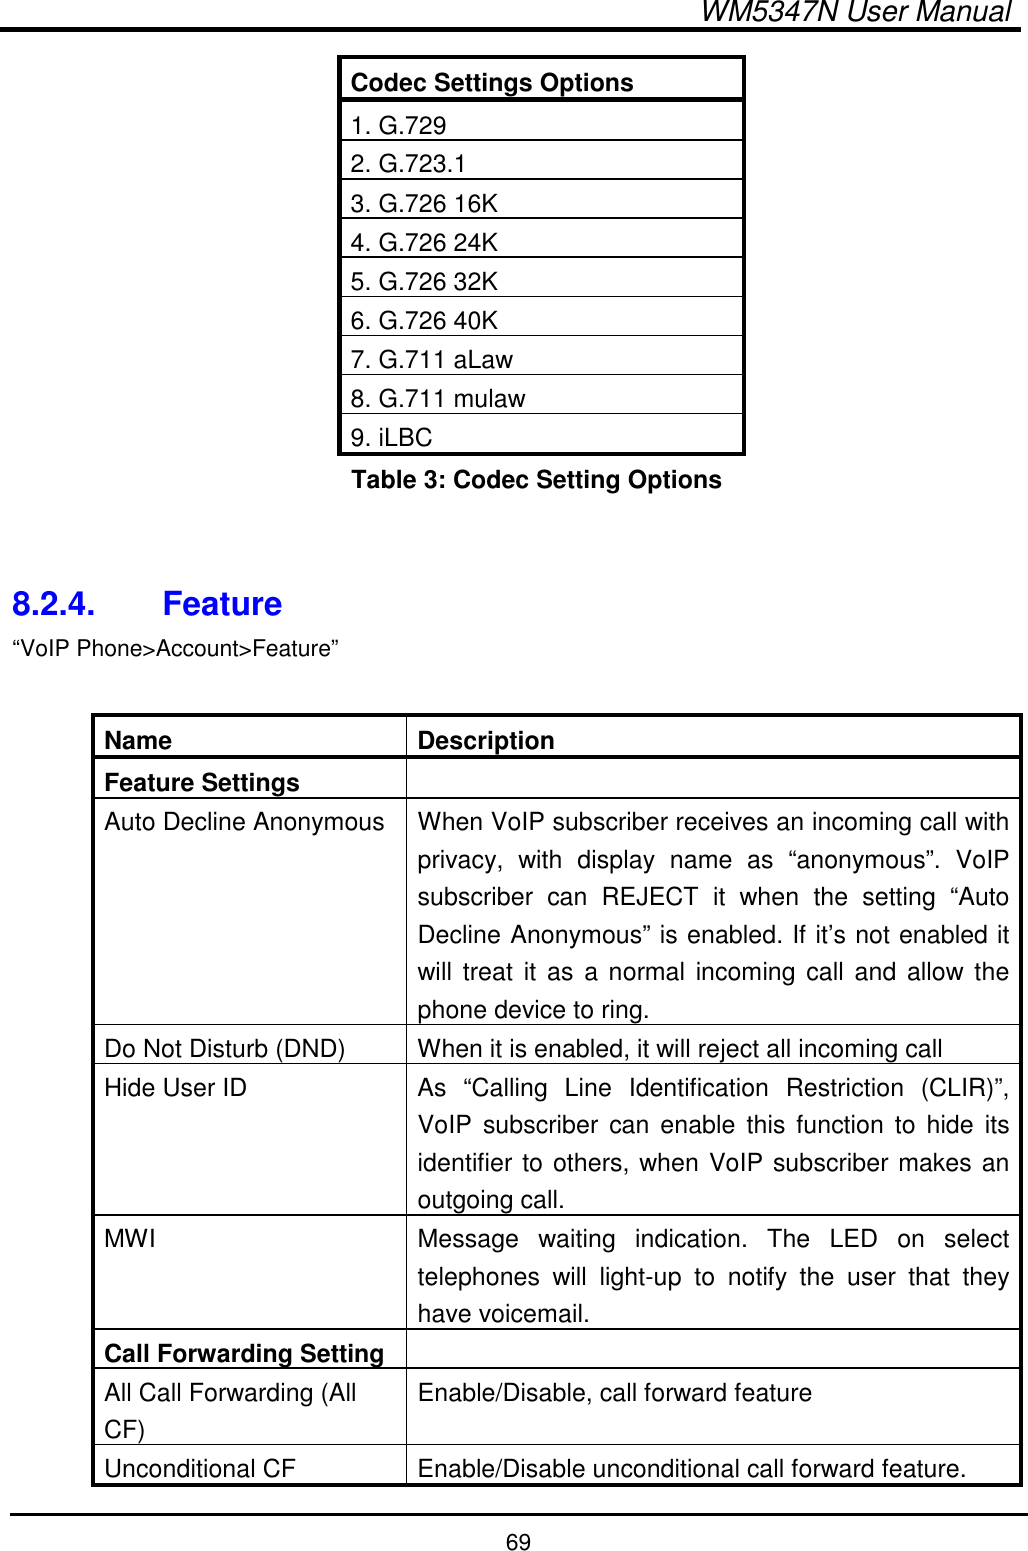  WM5347N User Manual  69 Codec Settings Options 1. G.729 2. G.723.1 3. G.726 16K 4. G.726 24K 5. G.726 32K 6. G.726 40K 7. G.711 aLaw 8. G.711 mulaw 9. iLBC Table 3: Codec Setting Options   8.2.4.  Feature “VoIP Phone&gt;Account&gt;Feature”  Name  Description Feature Settings   Auto Decline Anonymous  When VoIP subscriber receives an incoming call with privacy,  with  display  name  as  “anonymous”.  VoIP subscriber  can  REJECT  it  when  the  setting  “Auto Decline Anonymous” is enabled. If it’s not enabled it will treat  it  as  a normal incoming call and allow the phone device to ring. Do Not Disturb (DND)  When it is enabled, it will reject all incoming call Hide User ID  As  “Calling  Line  Identification  Restriction  (CLIR)”, VoIP  subscriber  can  enable  this function  to  hide  its identifier to others, when VoIP subscriber makes an outgoing call.   MWI  Message  waiting  indication.  The  LED  on  select telephones  will  light-up  to  notify  the  user  that  they have voicemail. Call Forwarding Setting   All Call Forwarding (All CF) Enable/Disable, call forward feature Unconditional CF  Enable/Disable unconditional call forward feature. 